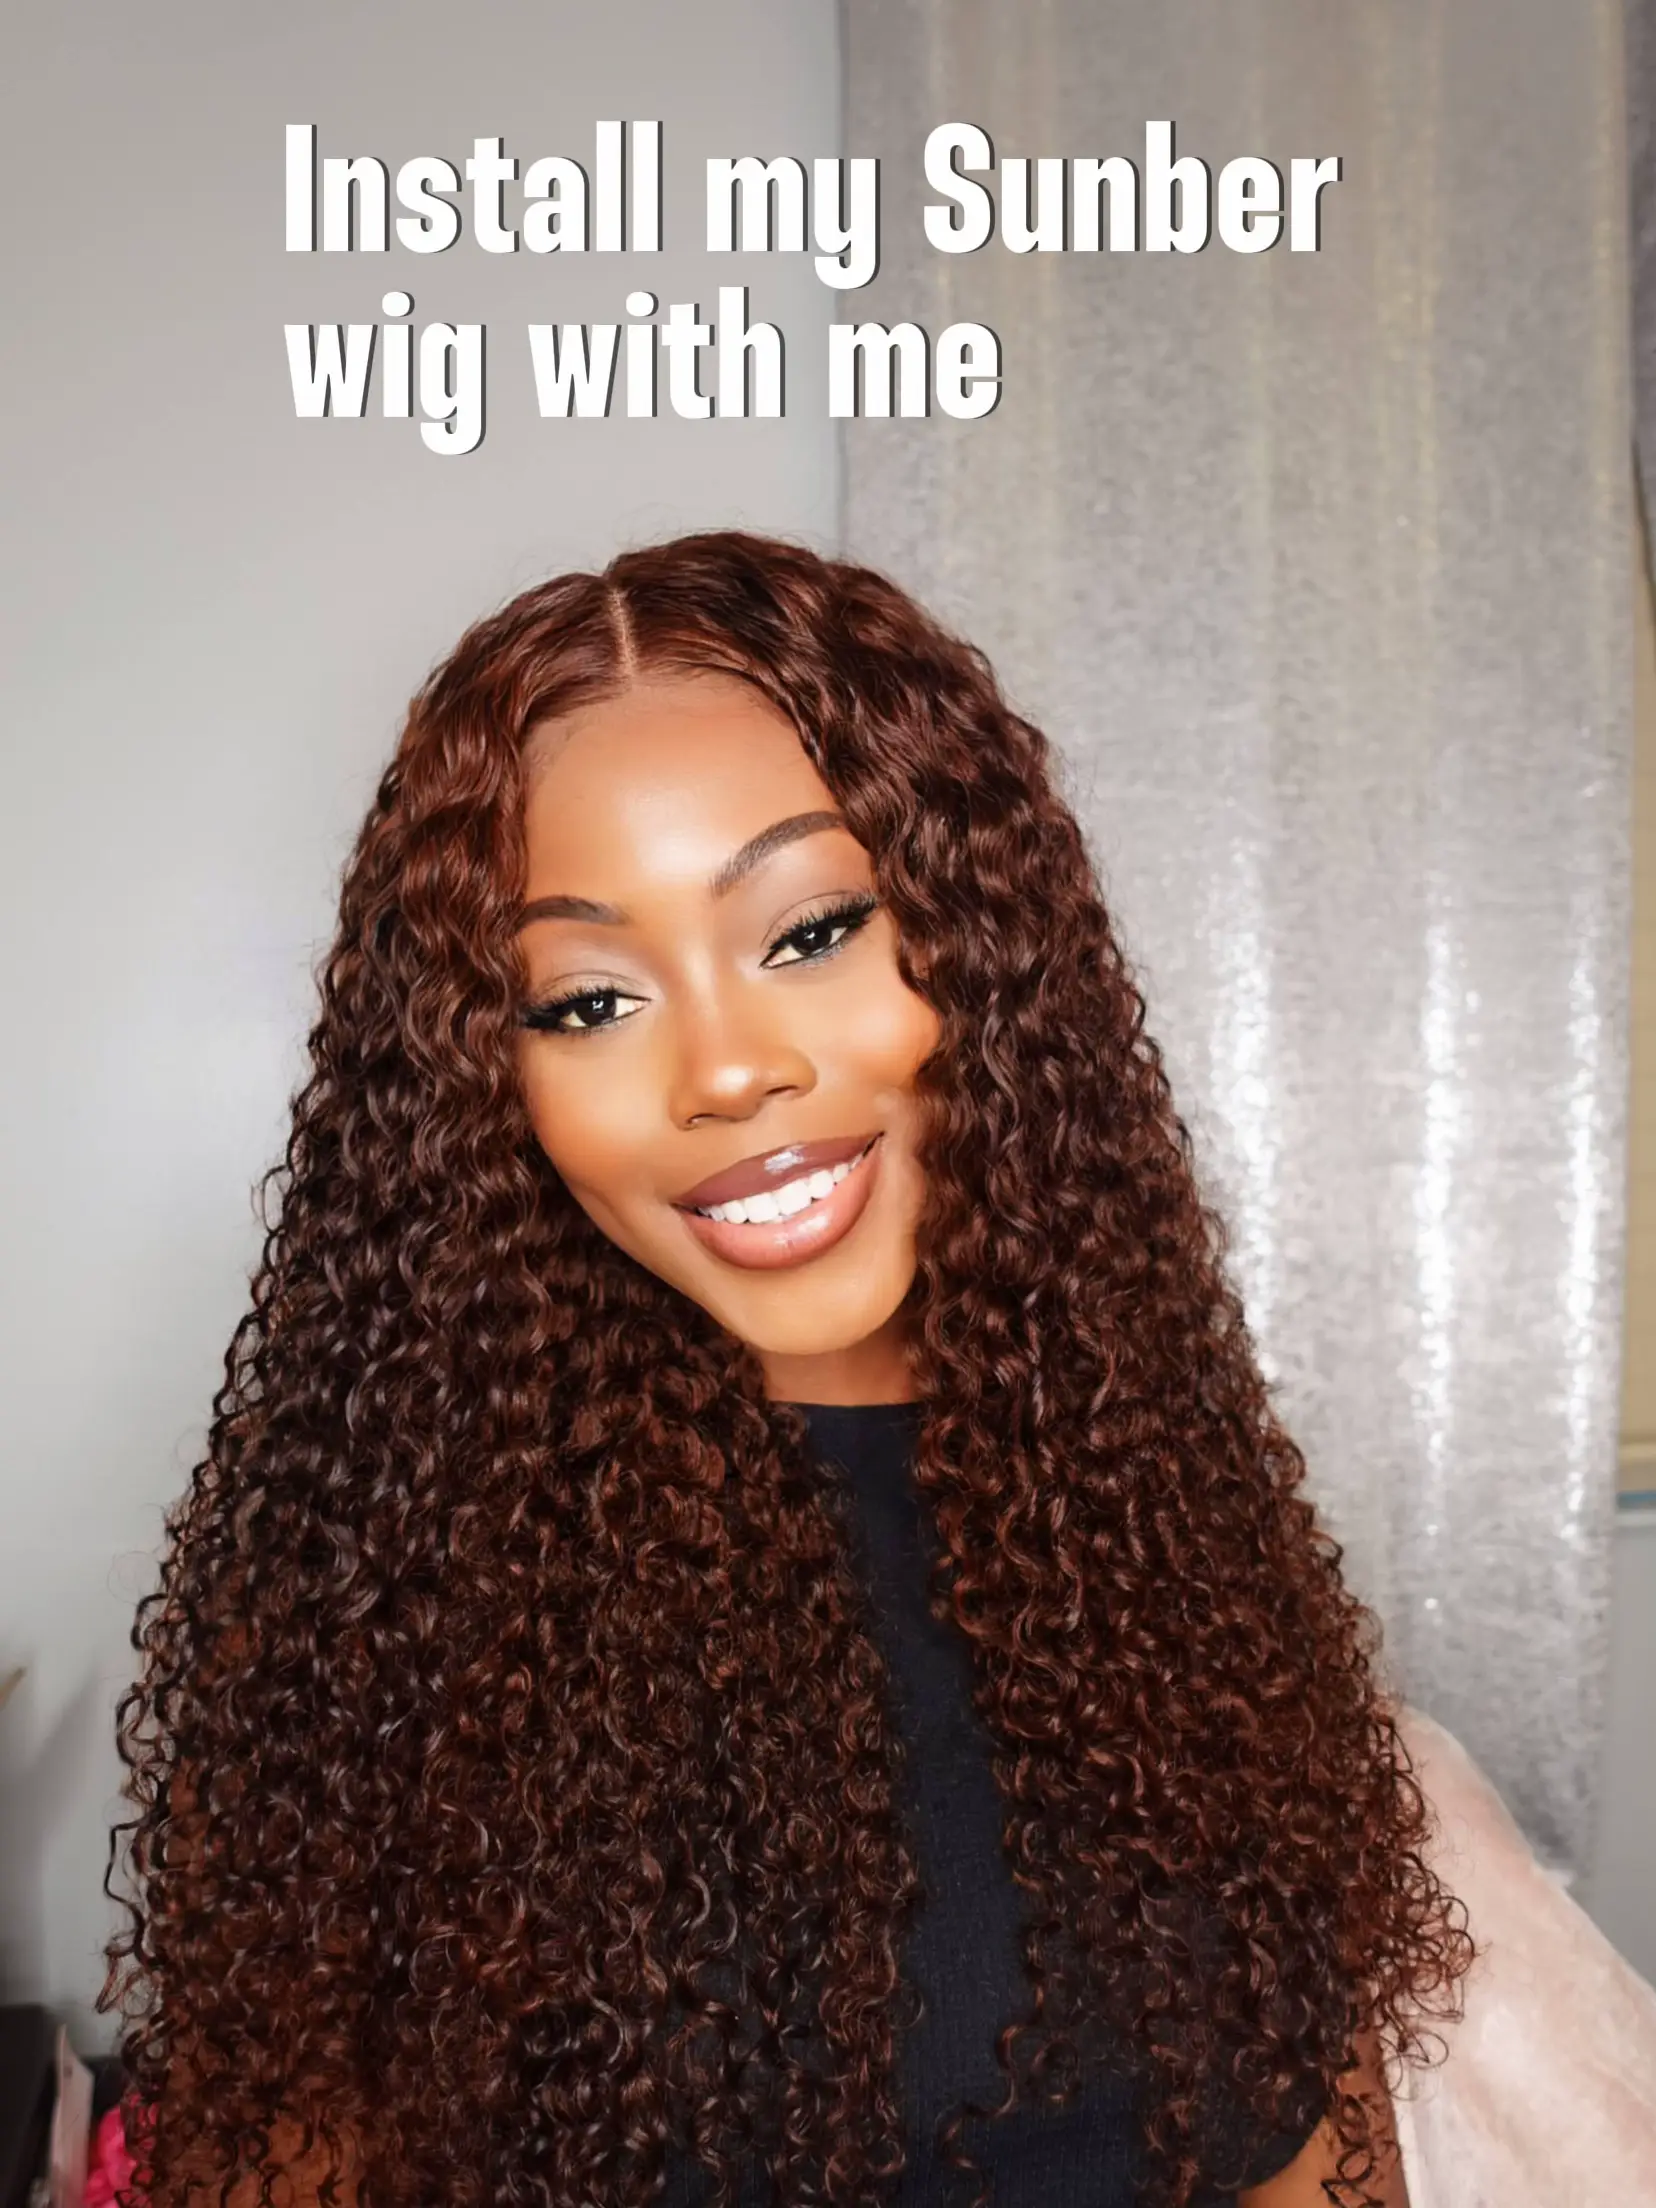 Install my Sunber wig with me ✨, Video published by Debbie Peaches